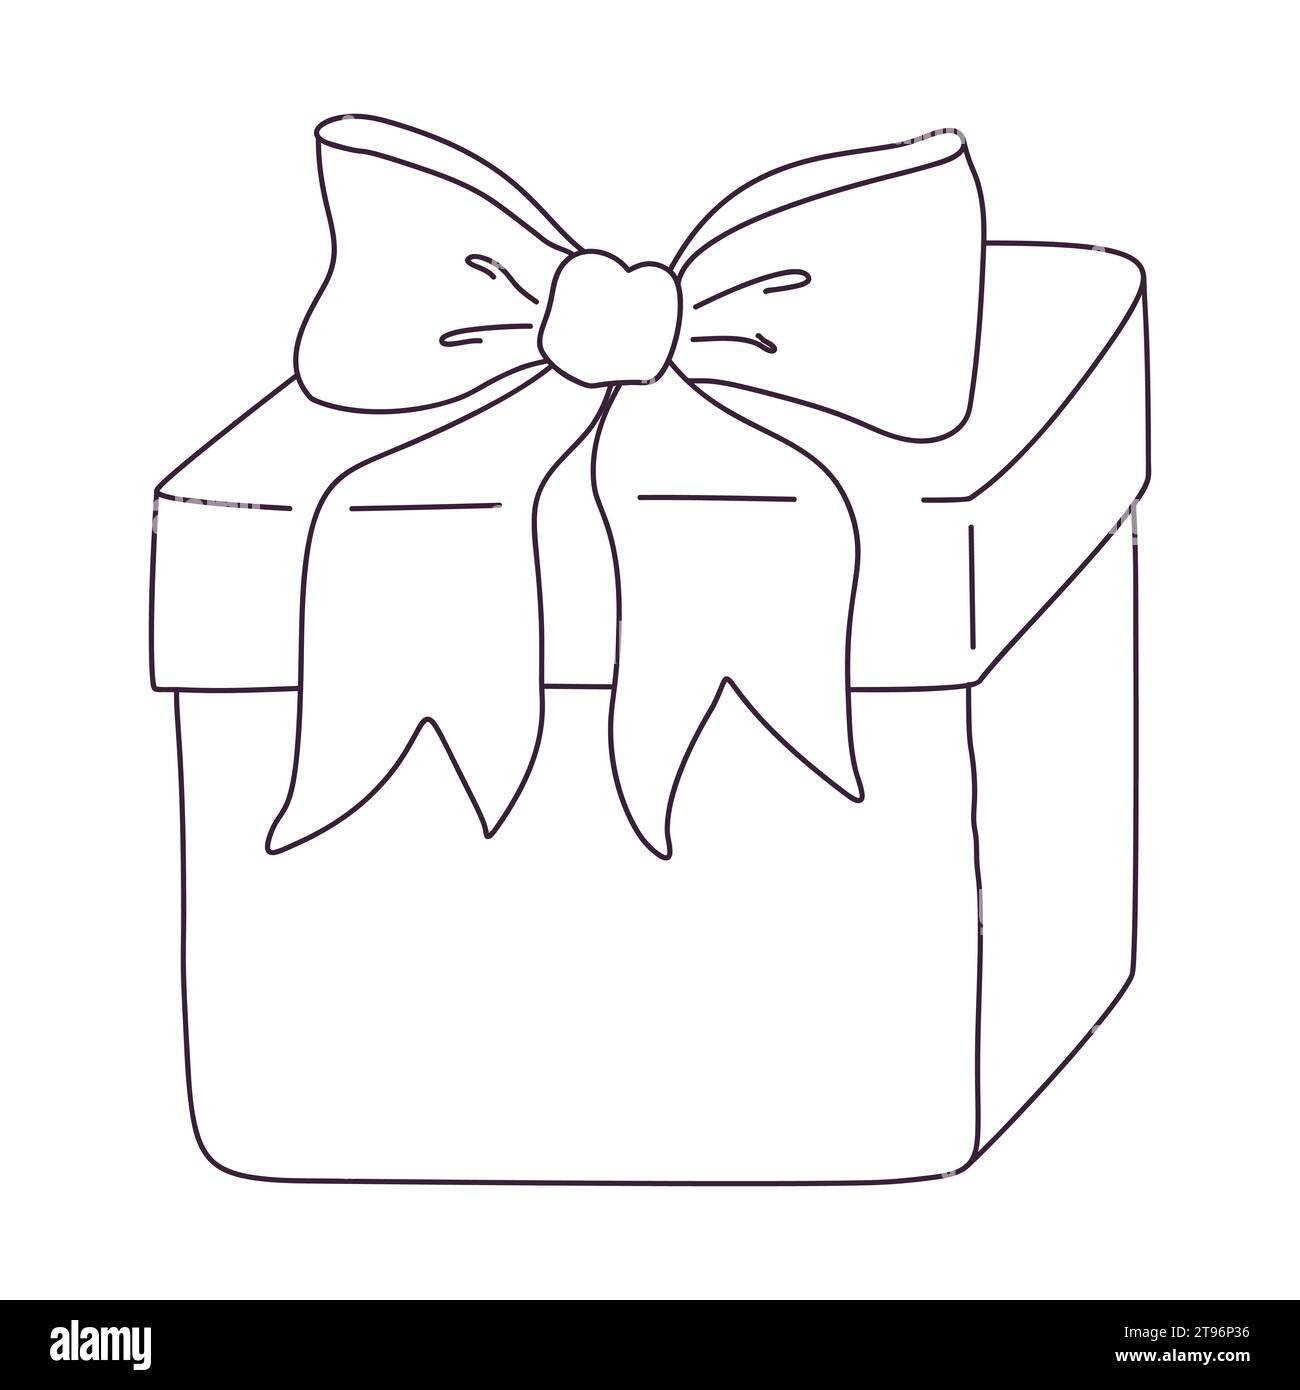 gift icon set. Color simple present box with ribbon. Hand drawing . Doodle  style black ink. different variations Stock Vector